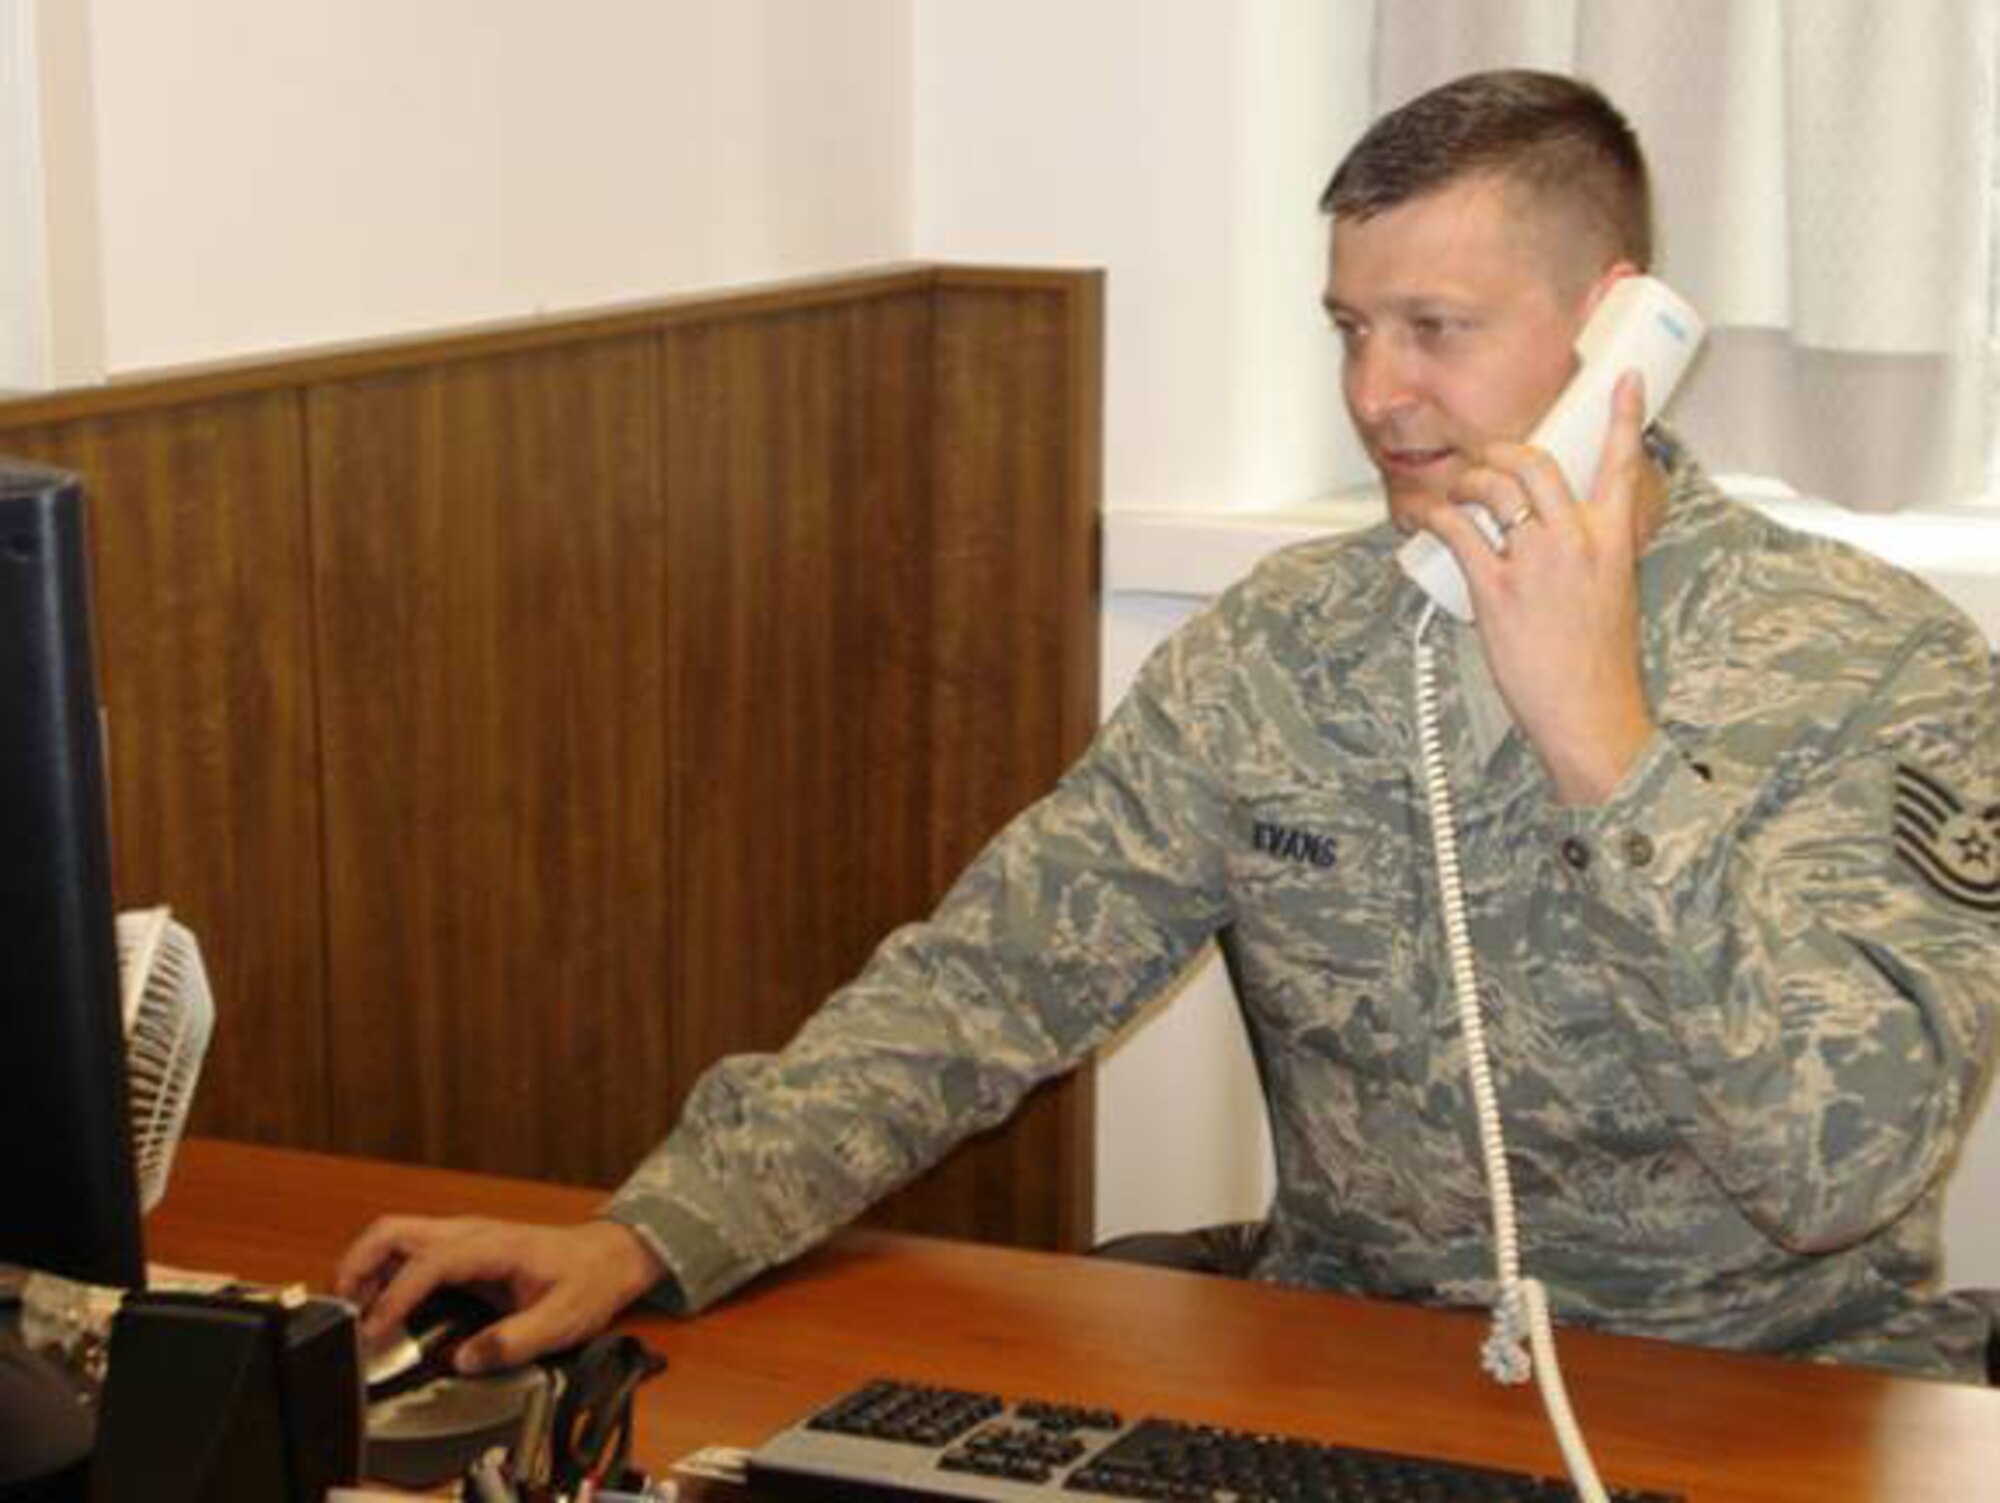 Tech. Sgt. Robert Evans interfaces with senior leadership on a tasking at the Joint NATO Command Branch office. (U.S Air Force Photo by Tech. Sgt. Regina Brewer)

